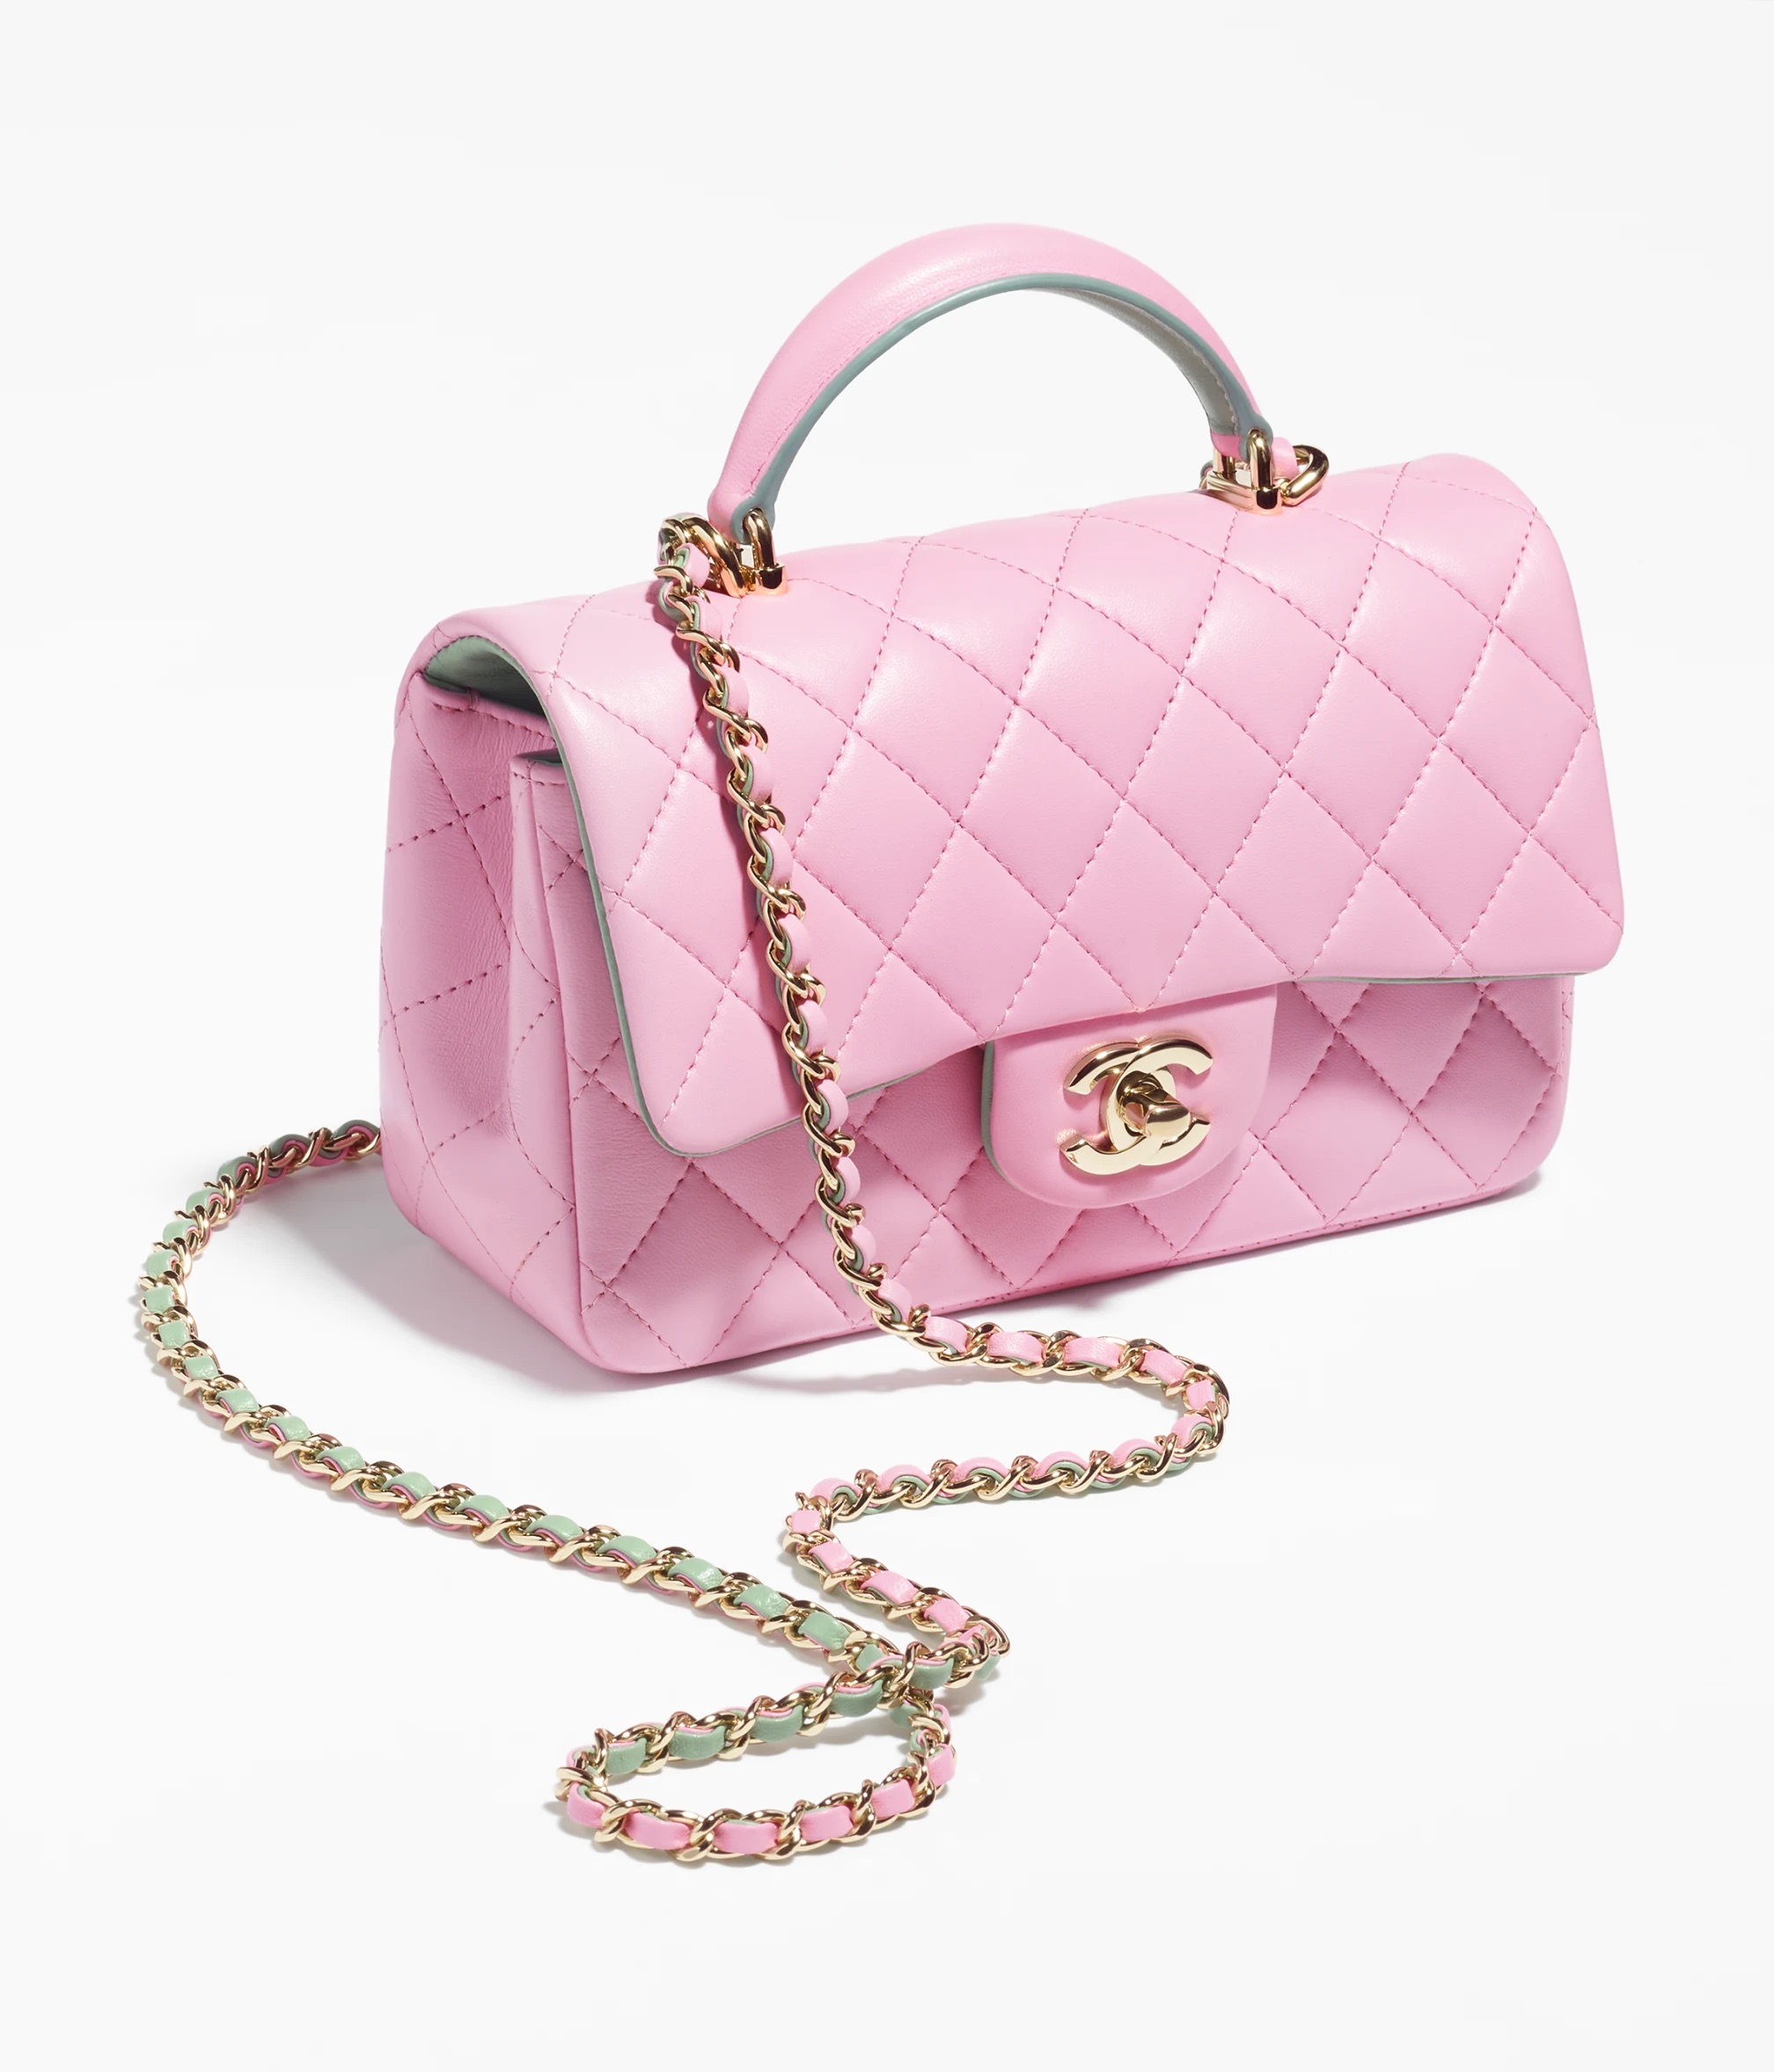 7 Budget Friendly Chanel Bags for Under 6K - luxfy